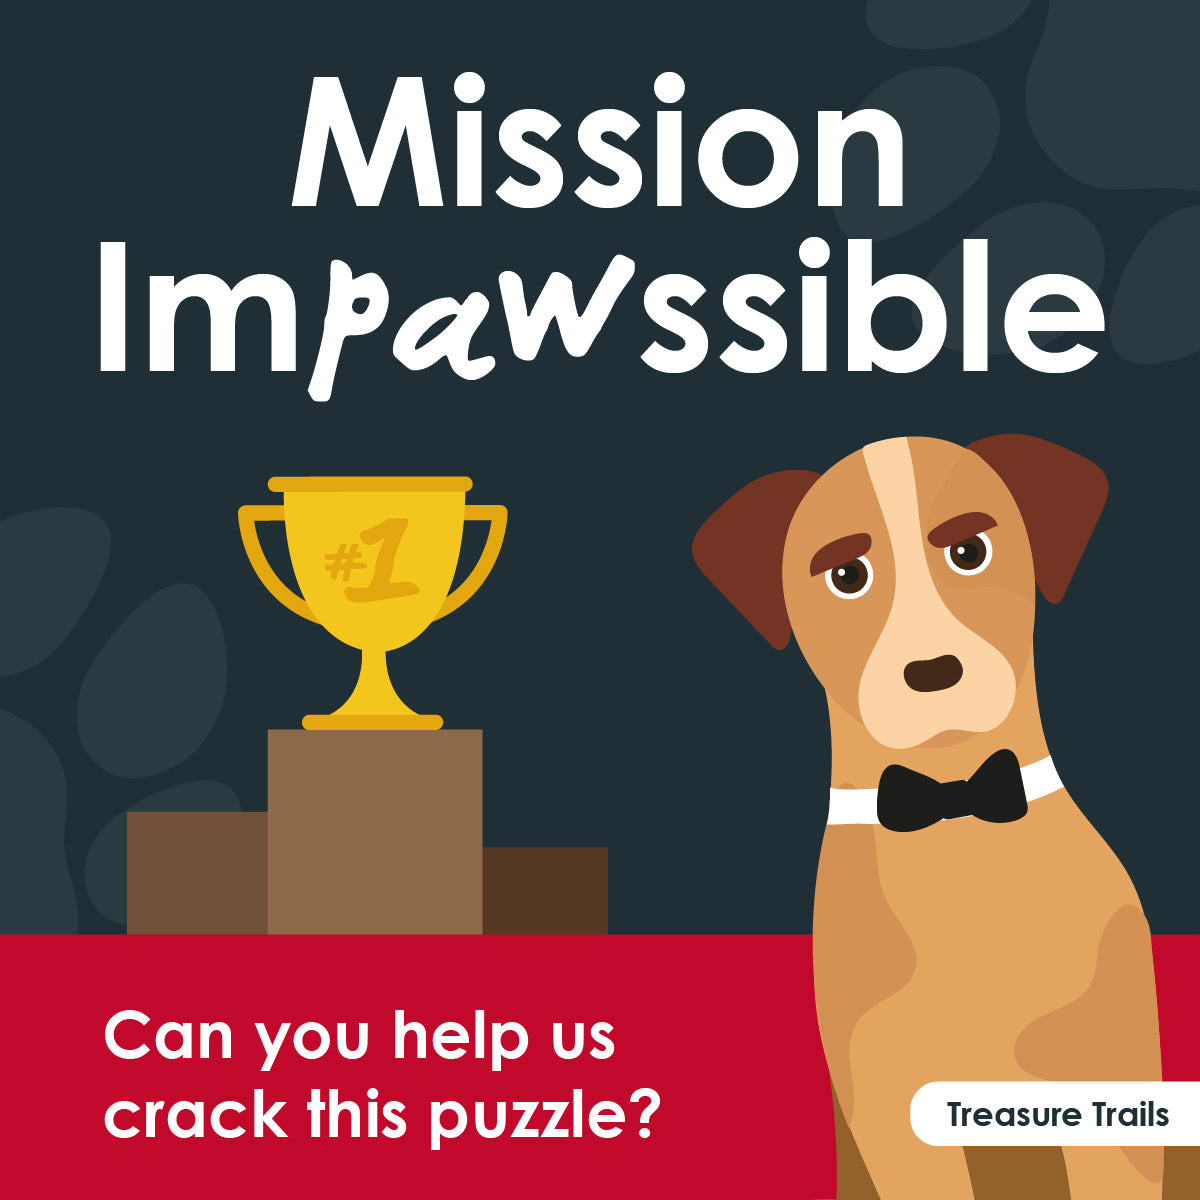 Mission Impawssible - Can you help us crack this puzzle?